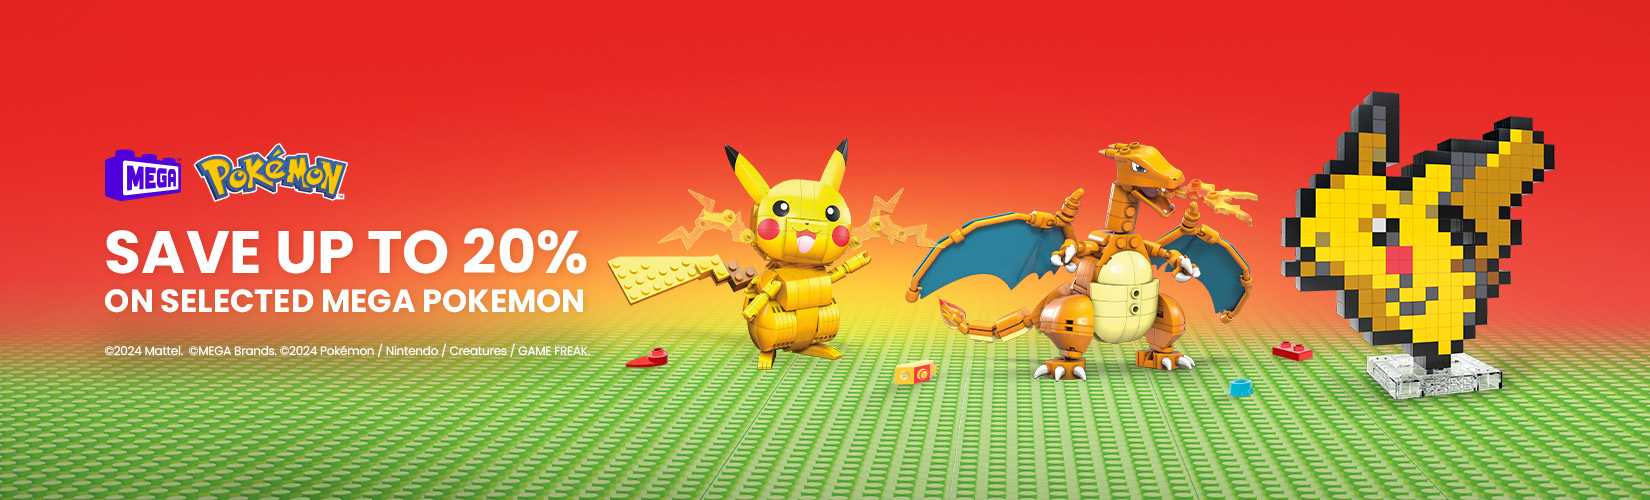 Save up to 20% on selected mega Pokemon.